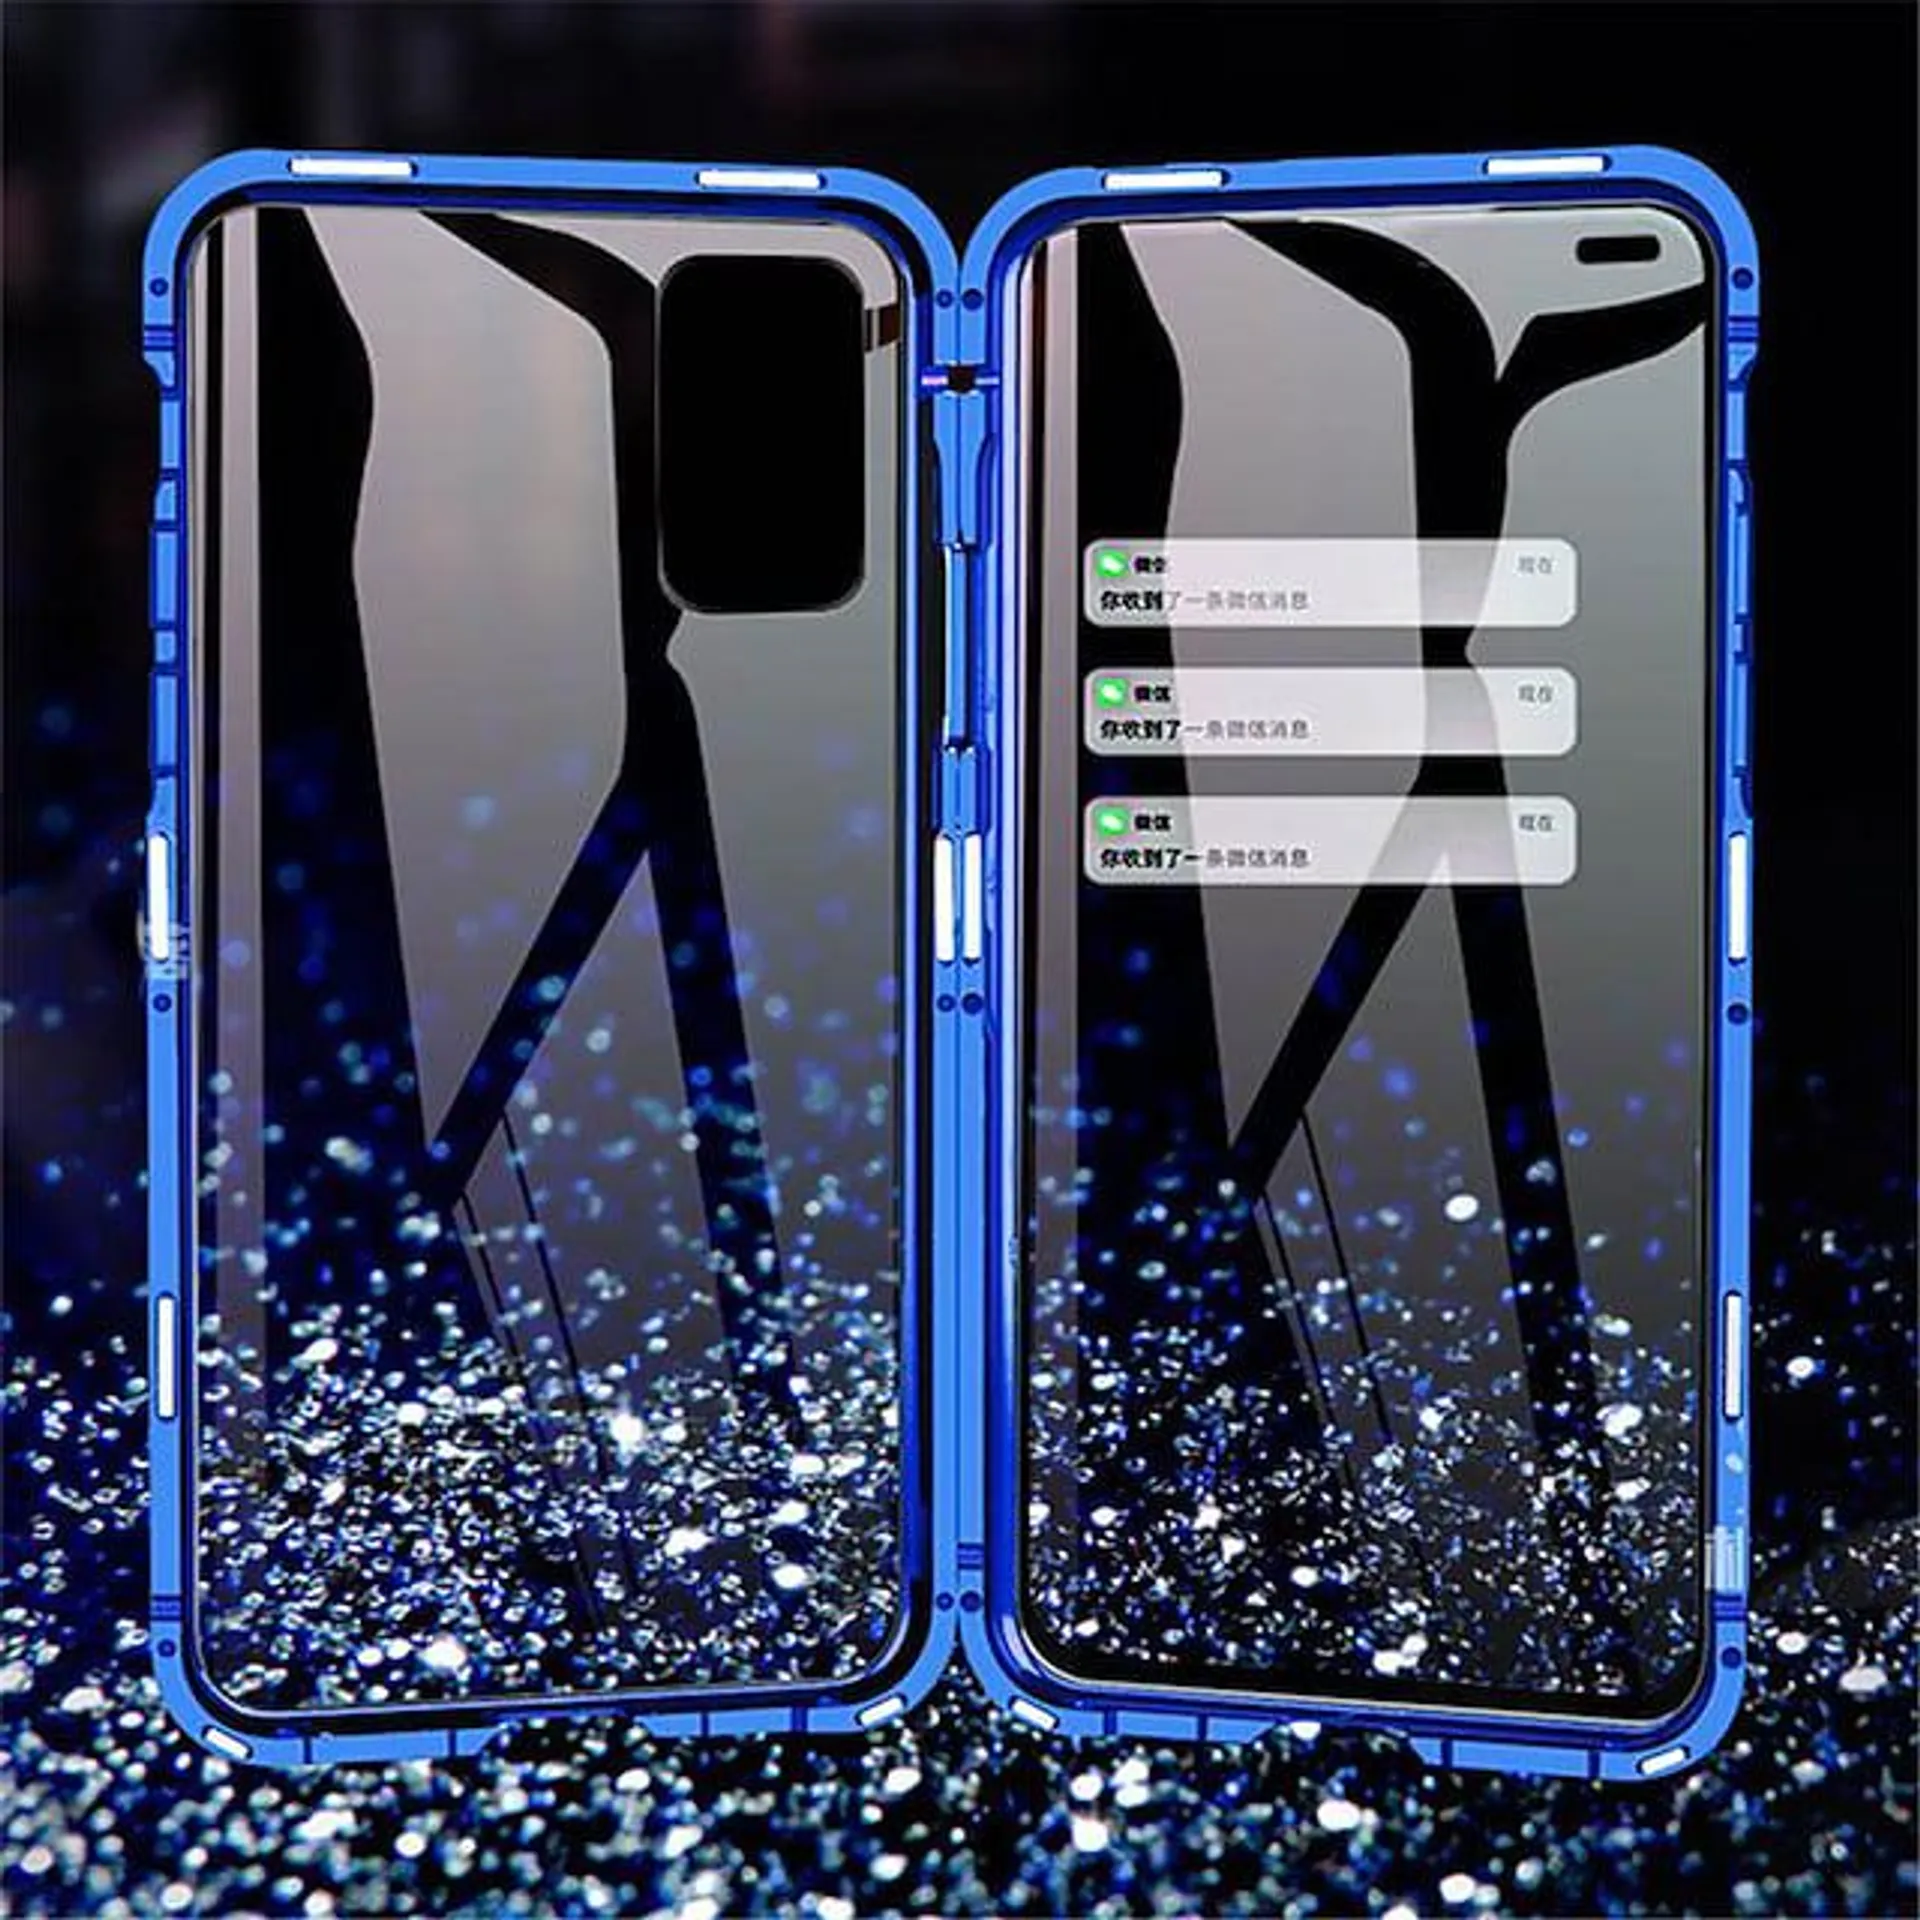 Magnetic 360 Metal Case For Samsung Galaxy S23 S22 S21 S20 Plus Ultra A72 A52 A32 S10 S10 Note 10 Double Sided Tempered Glass Case Cover